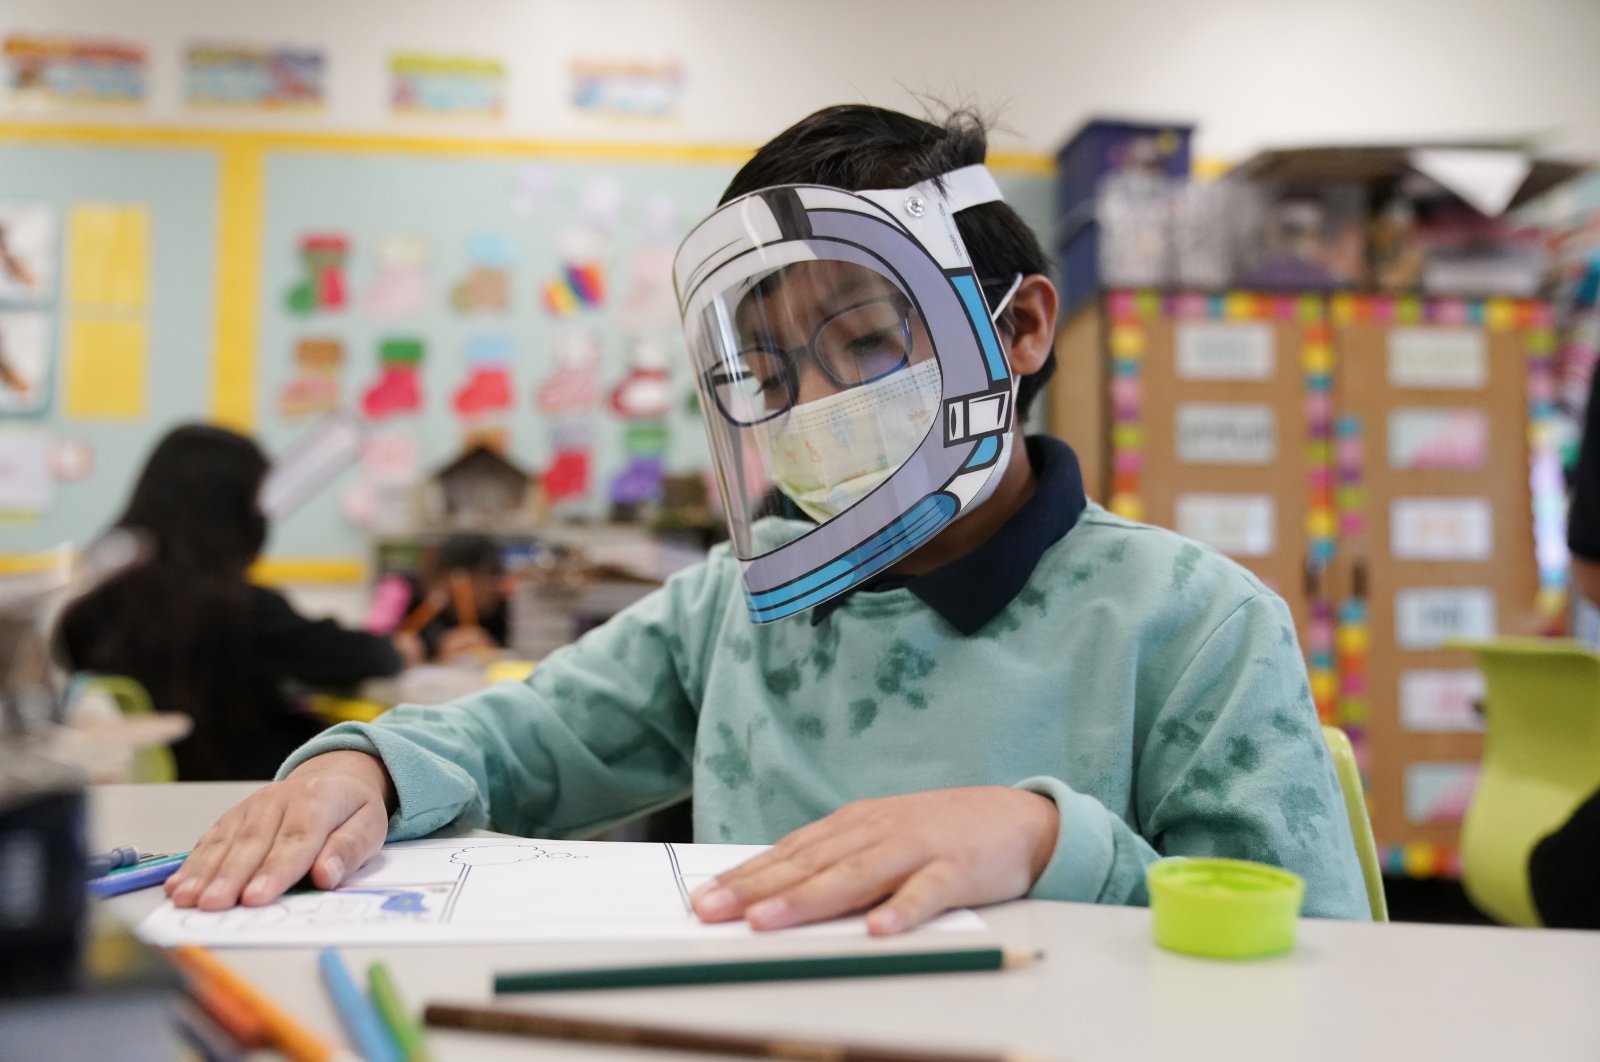 A student wears a mask and face shield at an elementary school in Lynwood, California, U.S. Jan. 12, 2022. (AP Photo)